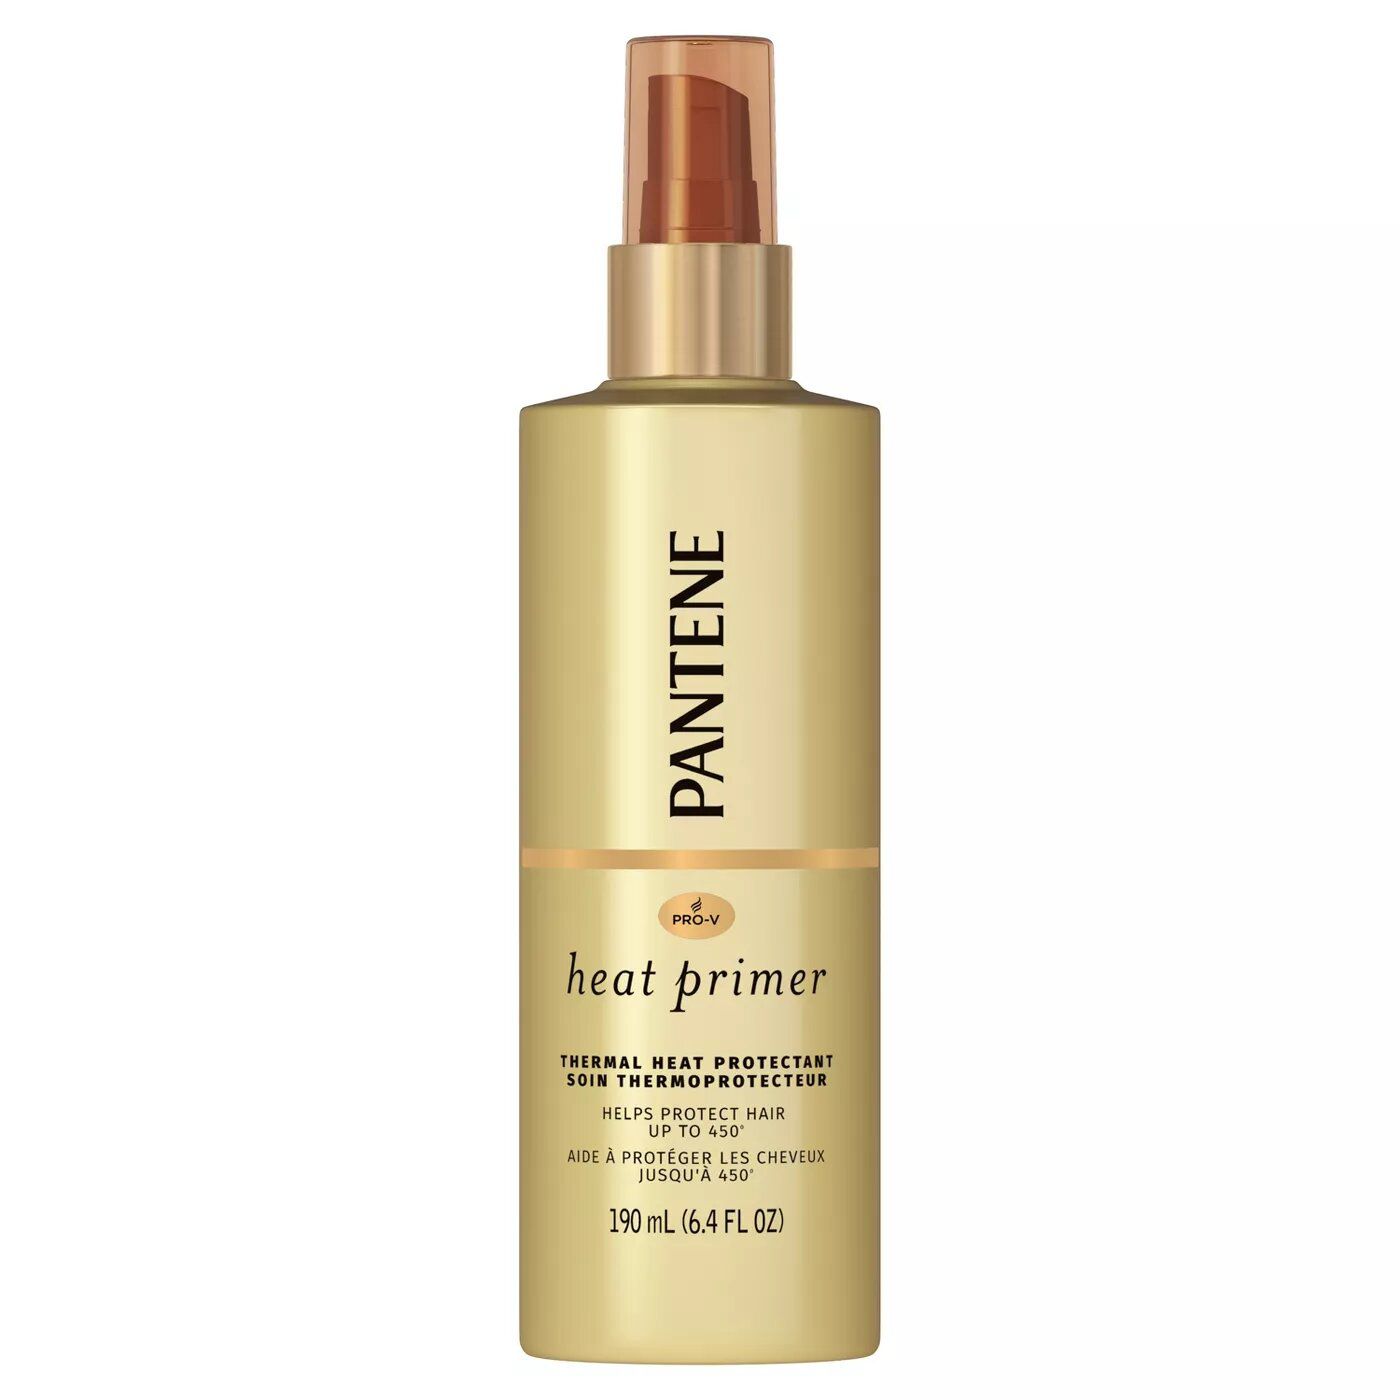 Pantene Pro-V Nutrient Boost Heat Primer Thermal Heat Protection